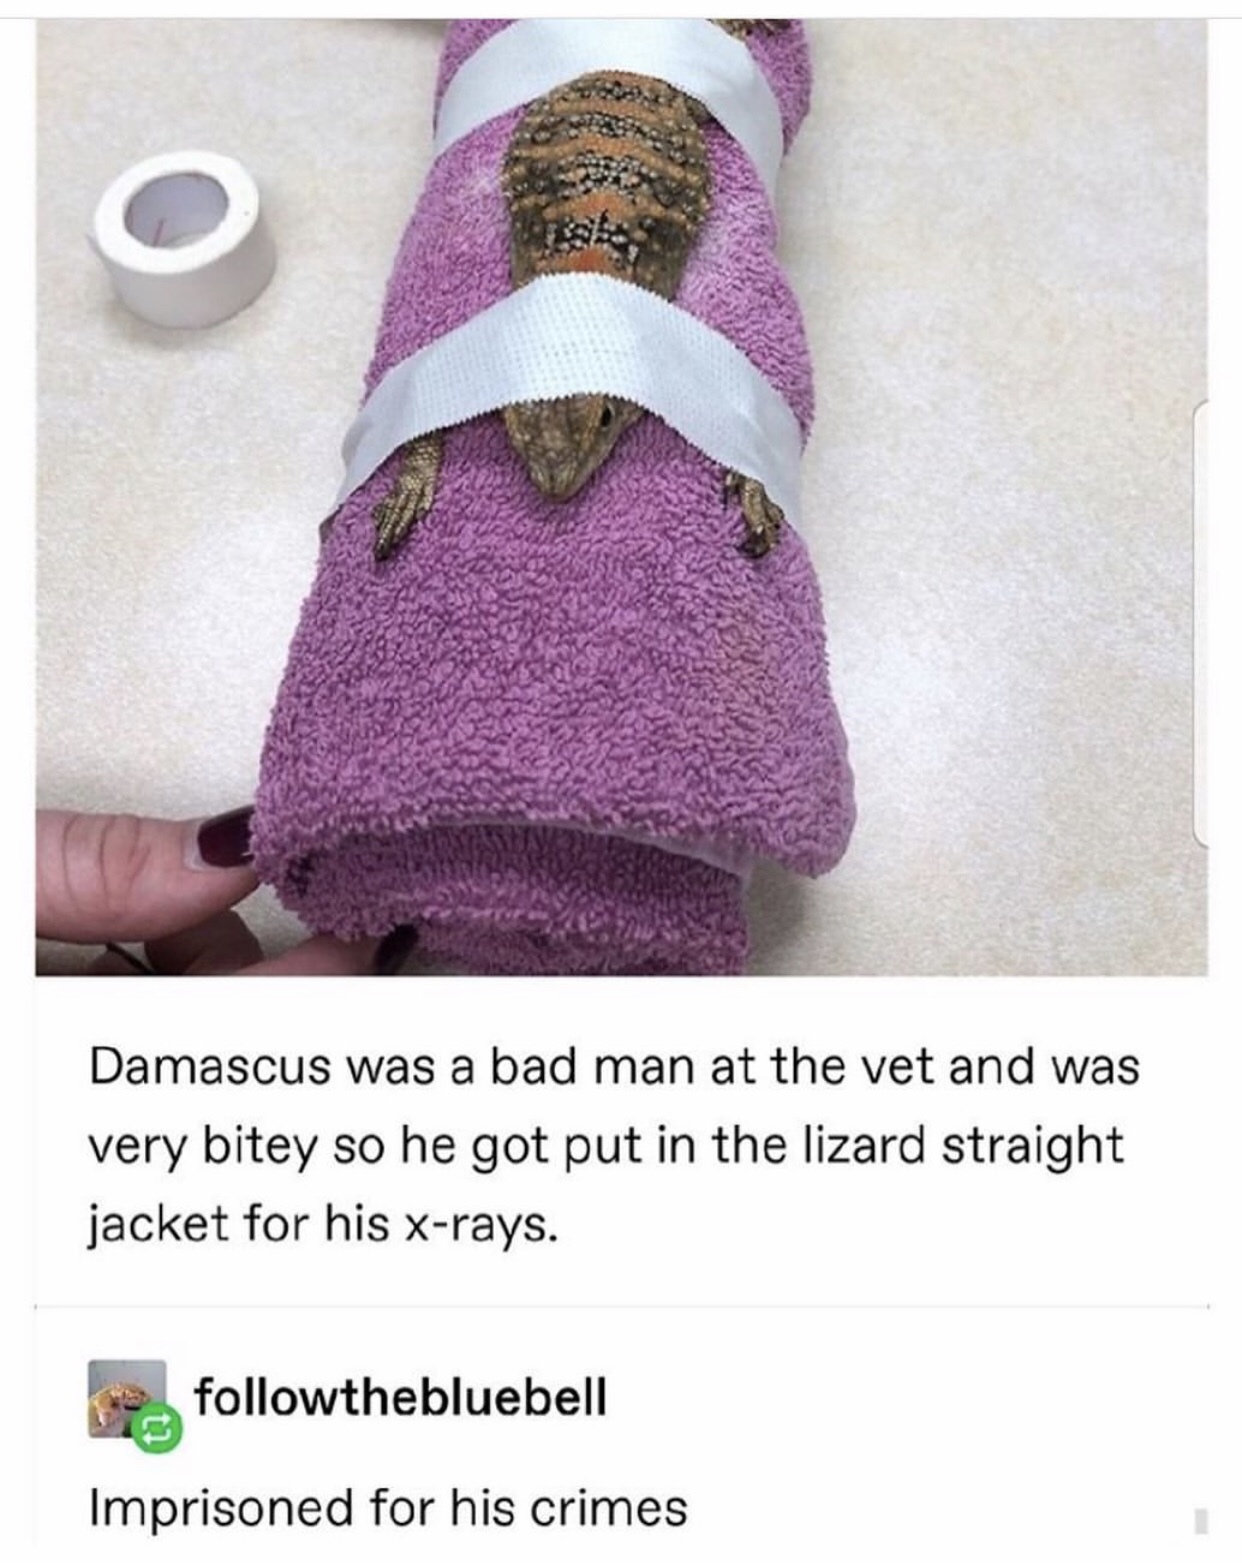 damascus was a bad man at the vet - Damascus was a bad man at the vet and was very bitey so he got put in the lizard straight jacket for his xrays. thebluebell Imprisoned for his crimes